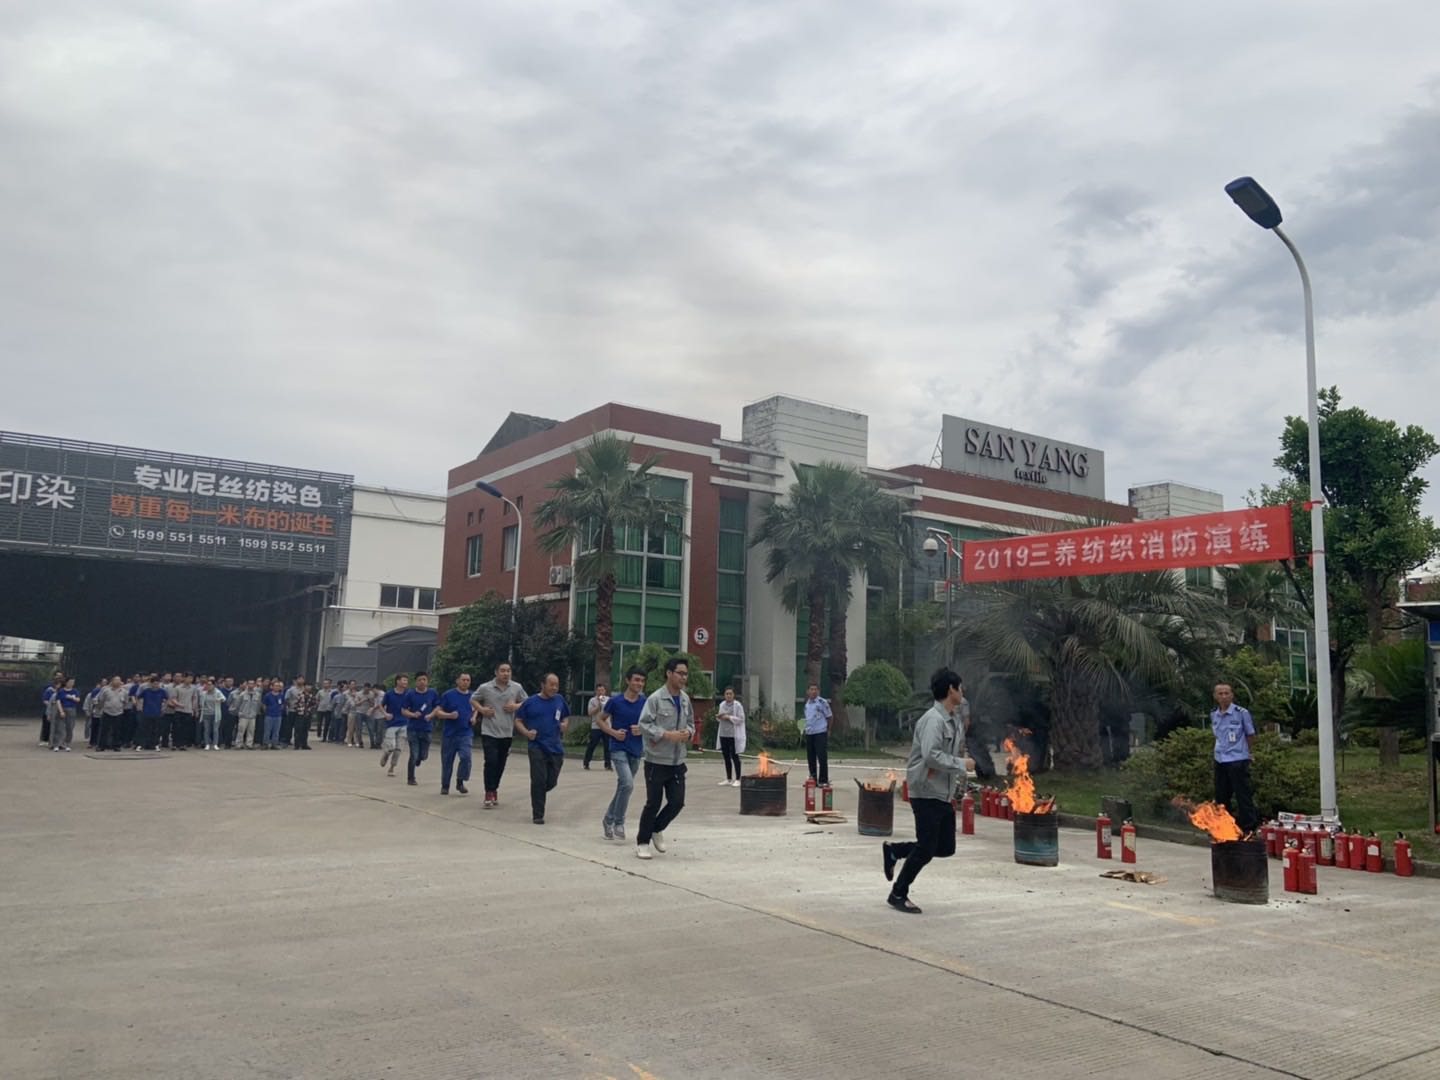 Sanyang Textile - 2019 Fire Safety Exercise